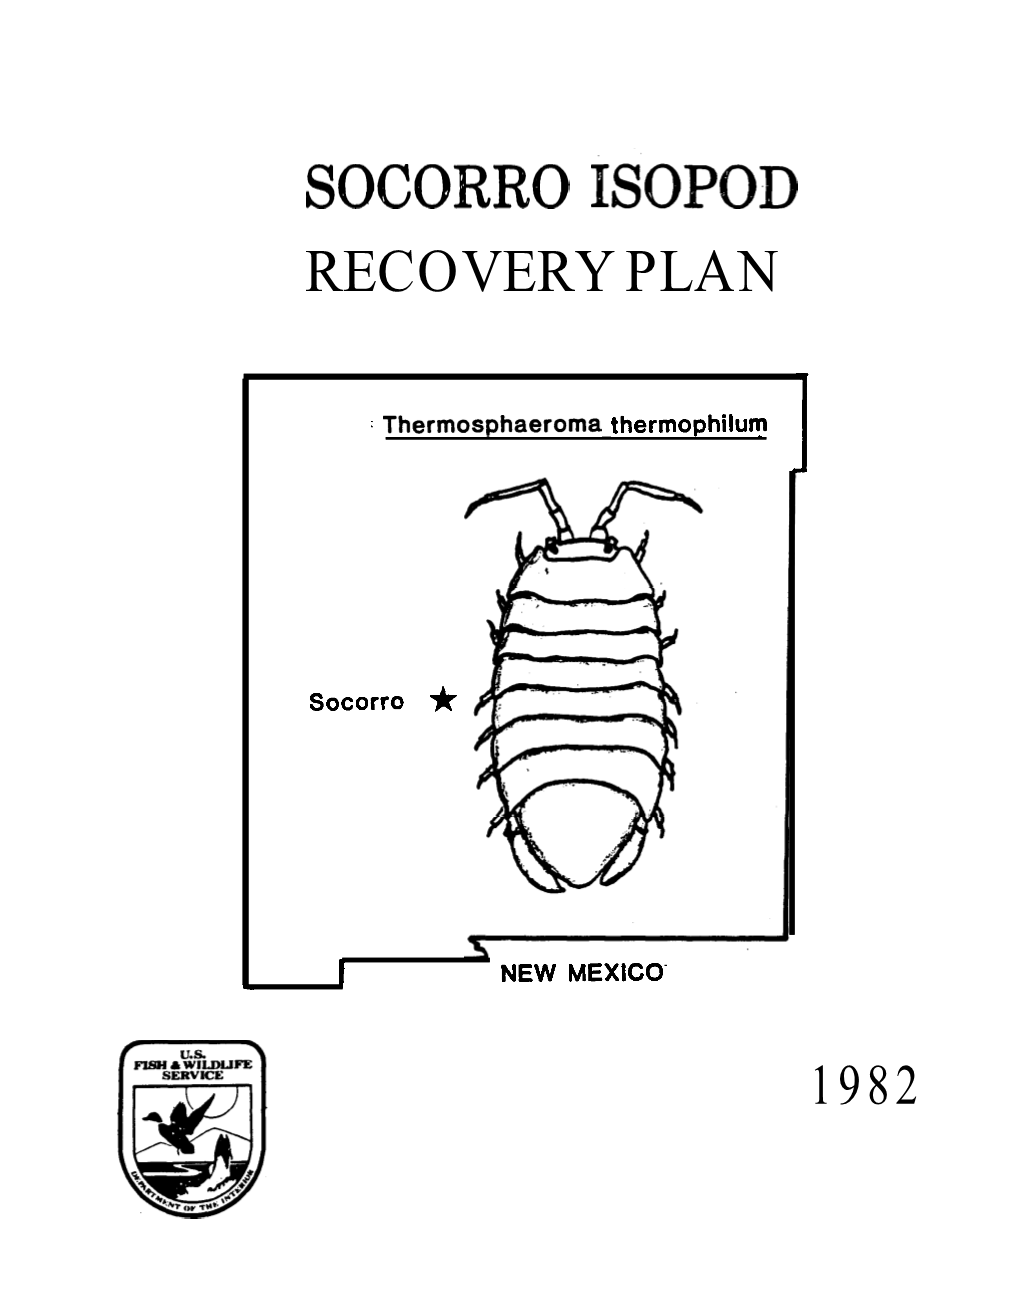 Socorro Isopod Recovery Plan Was Developed by the New Mexico Game and Fish Department Under Contract to the Albuquerque Regional Director of the U.S